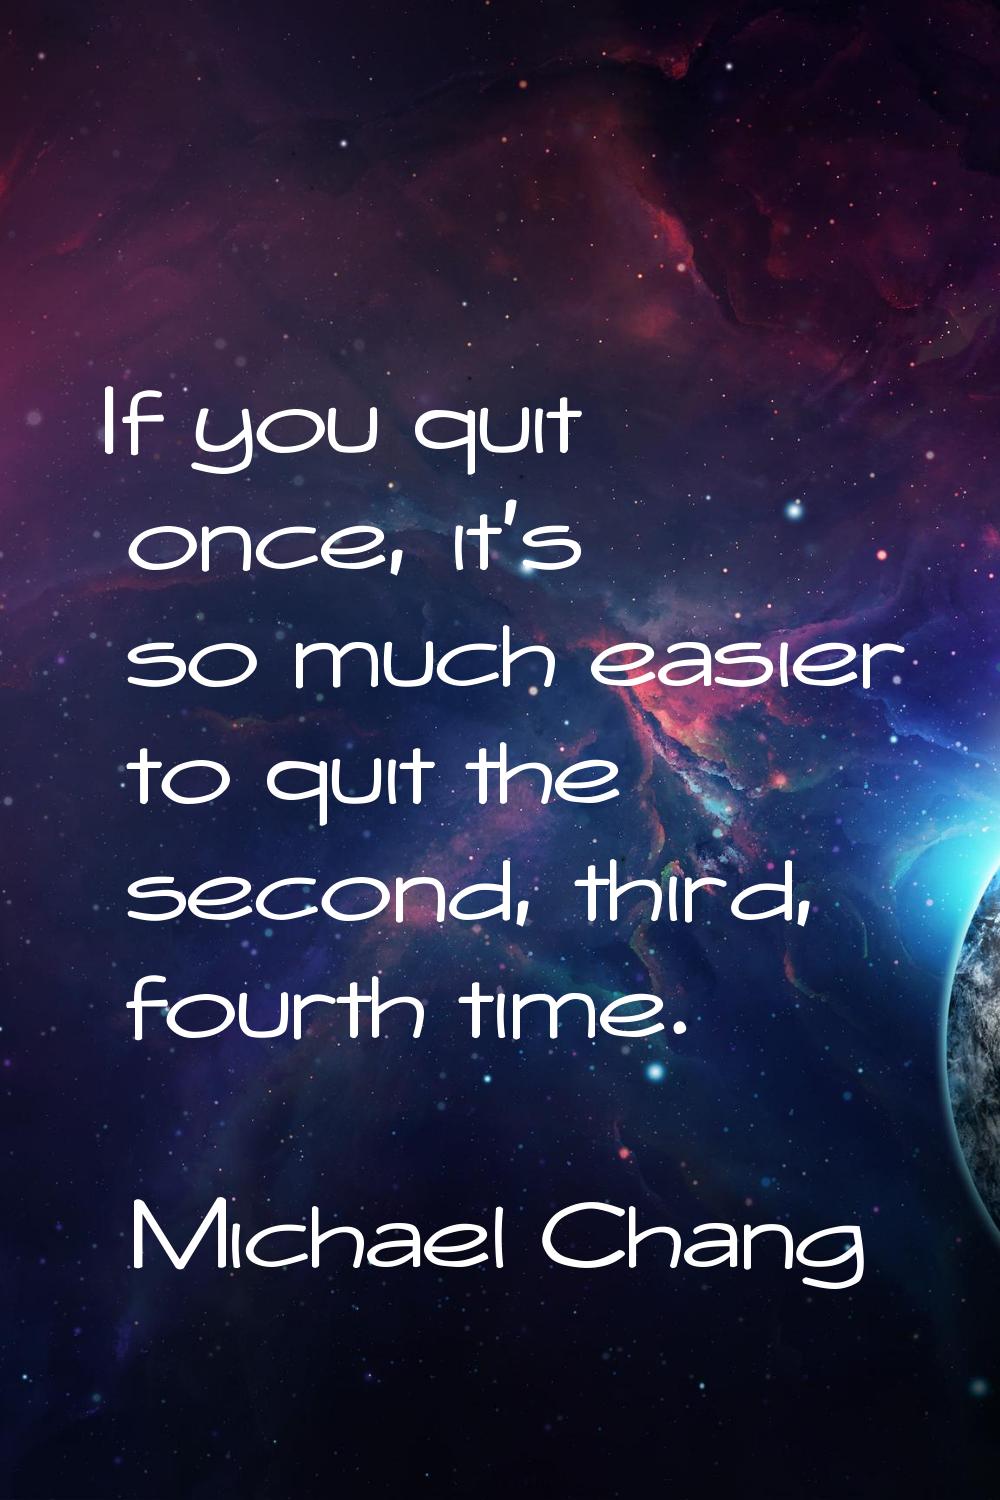 If you quit once, it's so much easier to quit the second, third, fourth time.